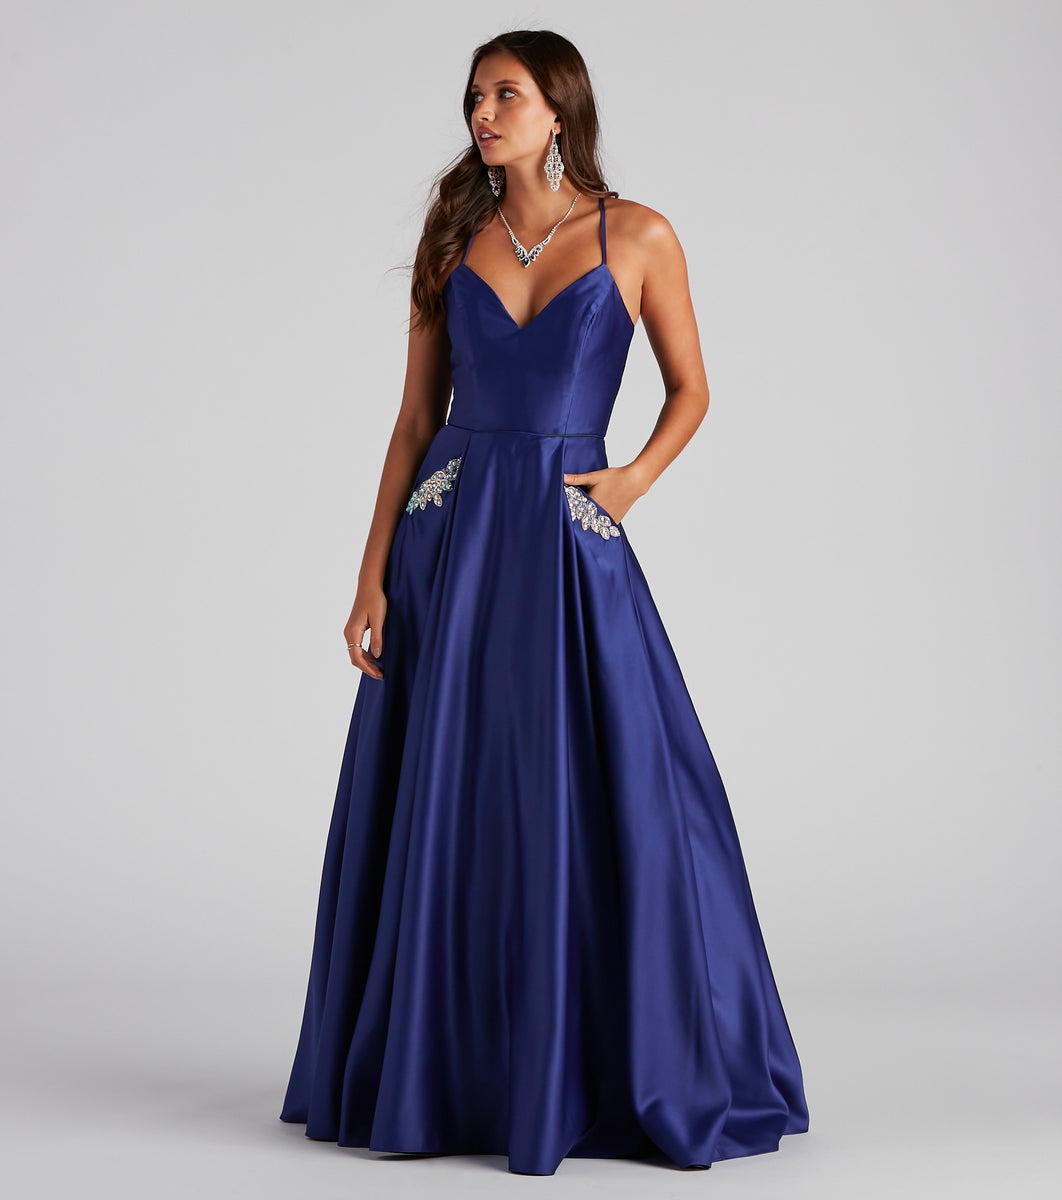 Rita Woven Satin Embellished Ball Gown